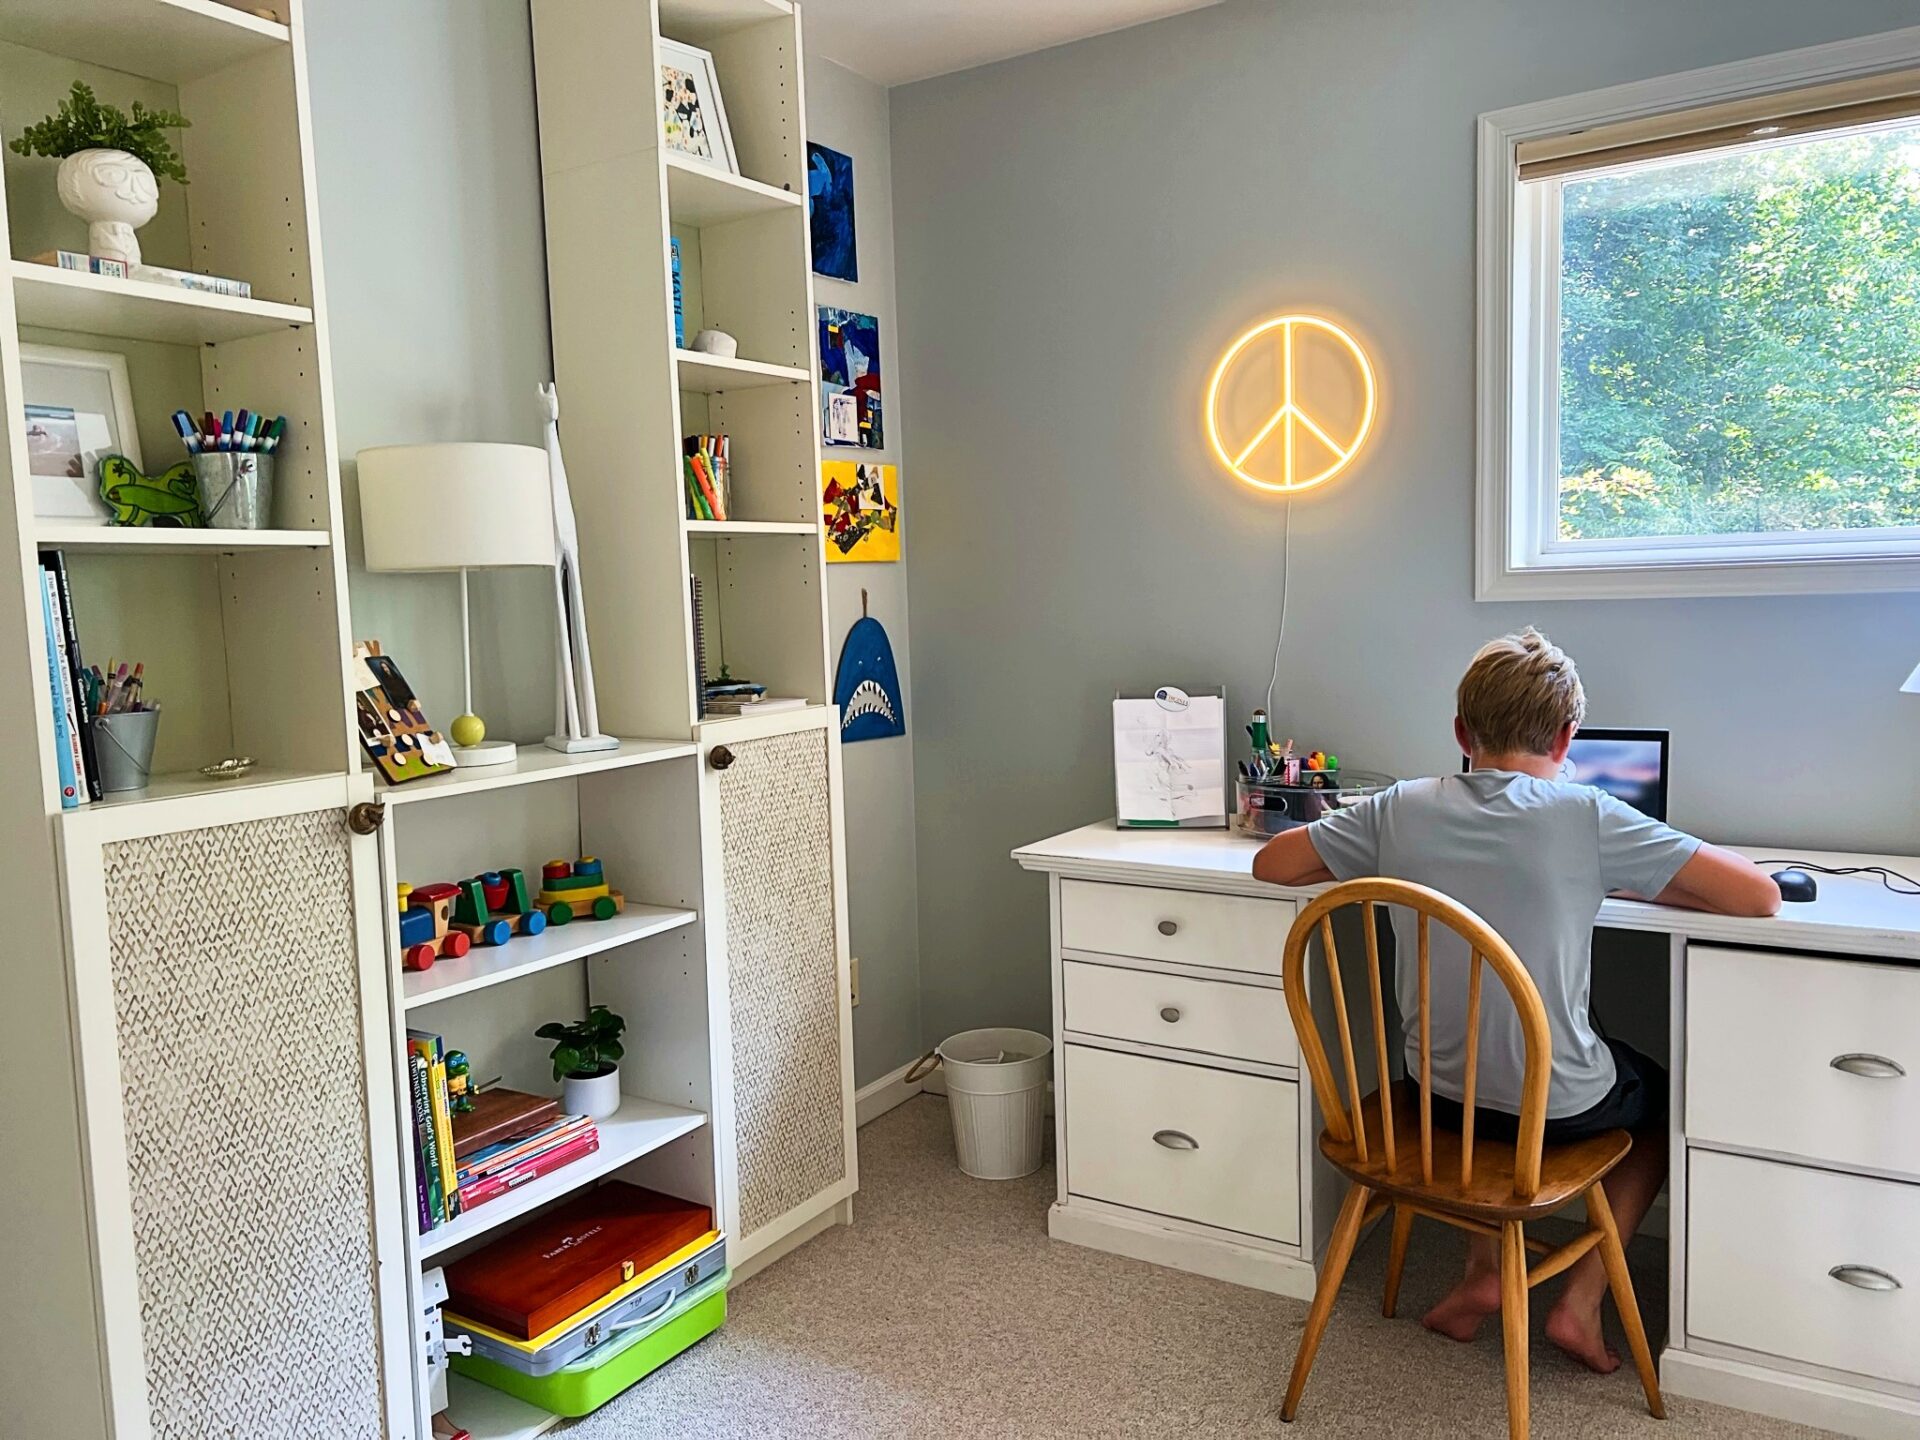 Our Art Cabinet — the Workspace for Children